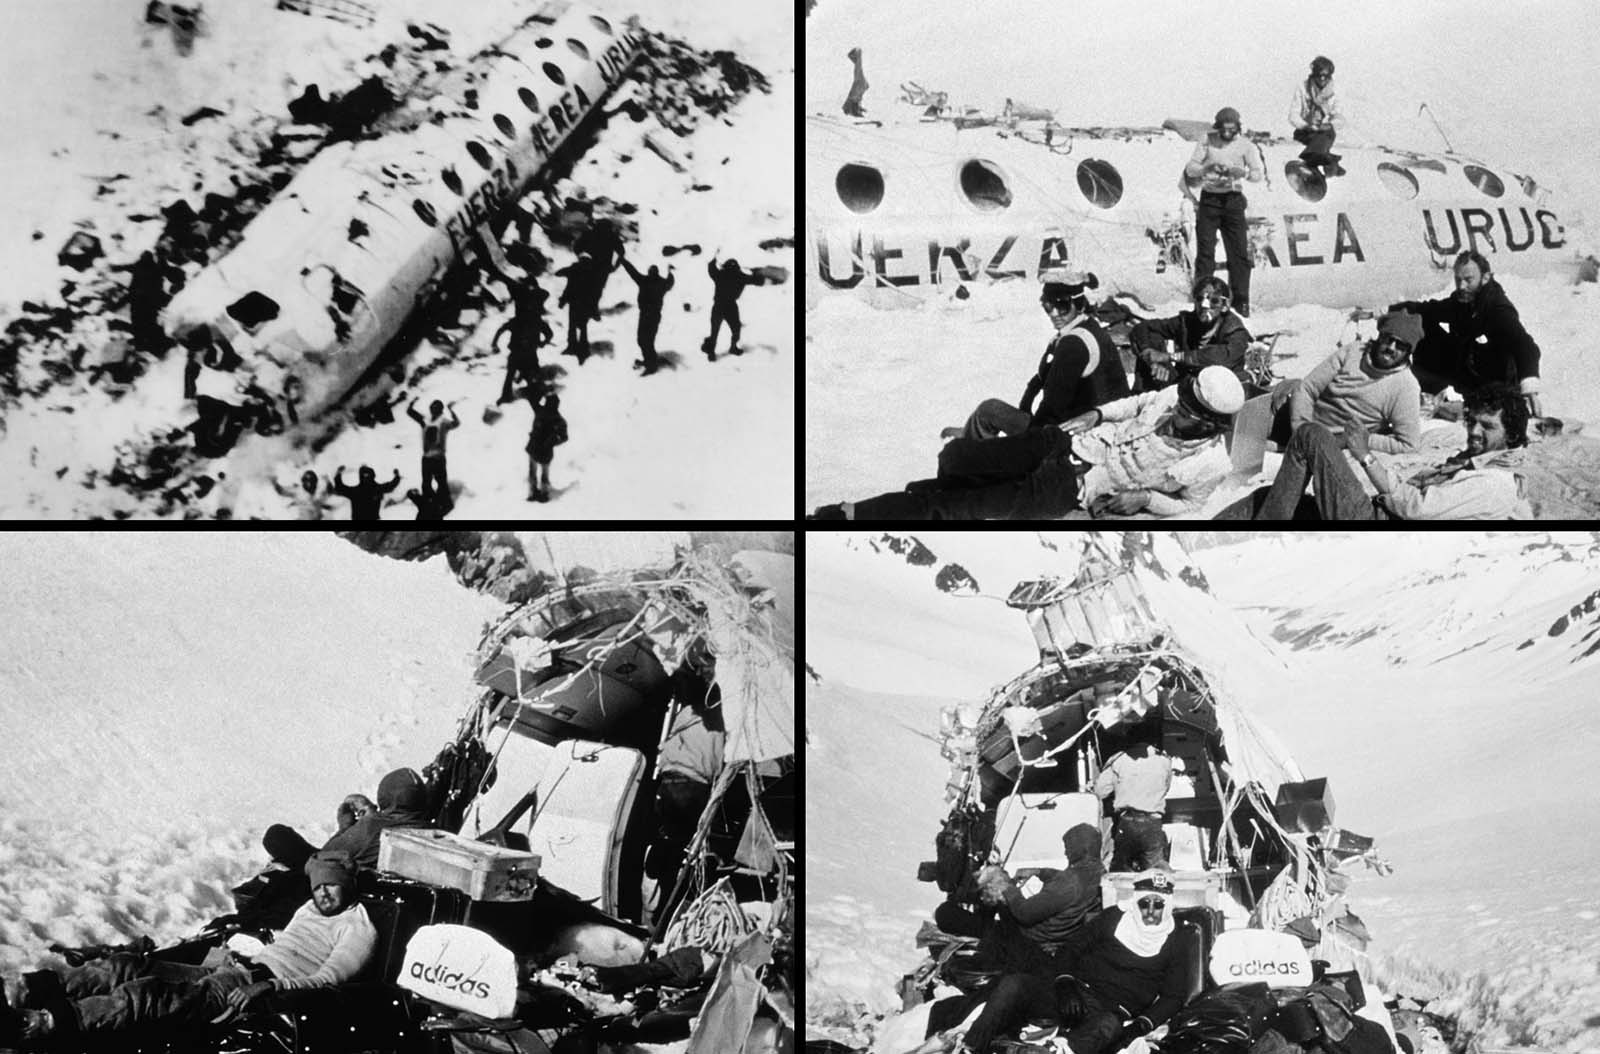 The Andes Flight Disaster: A Plane Carrying 45 People Crashed and the Survivors Resorting to Cannibalism Before Being Rescued, 1972